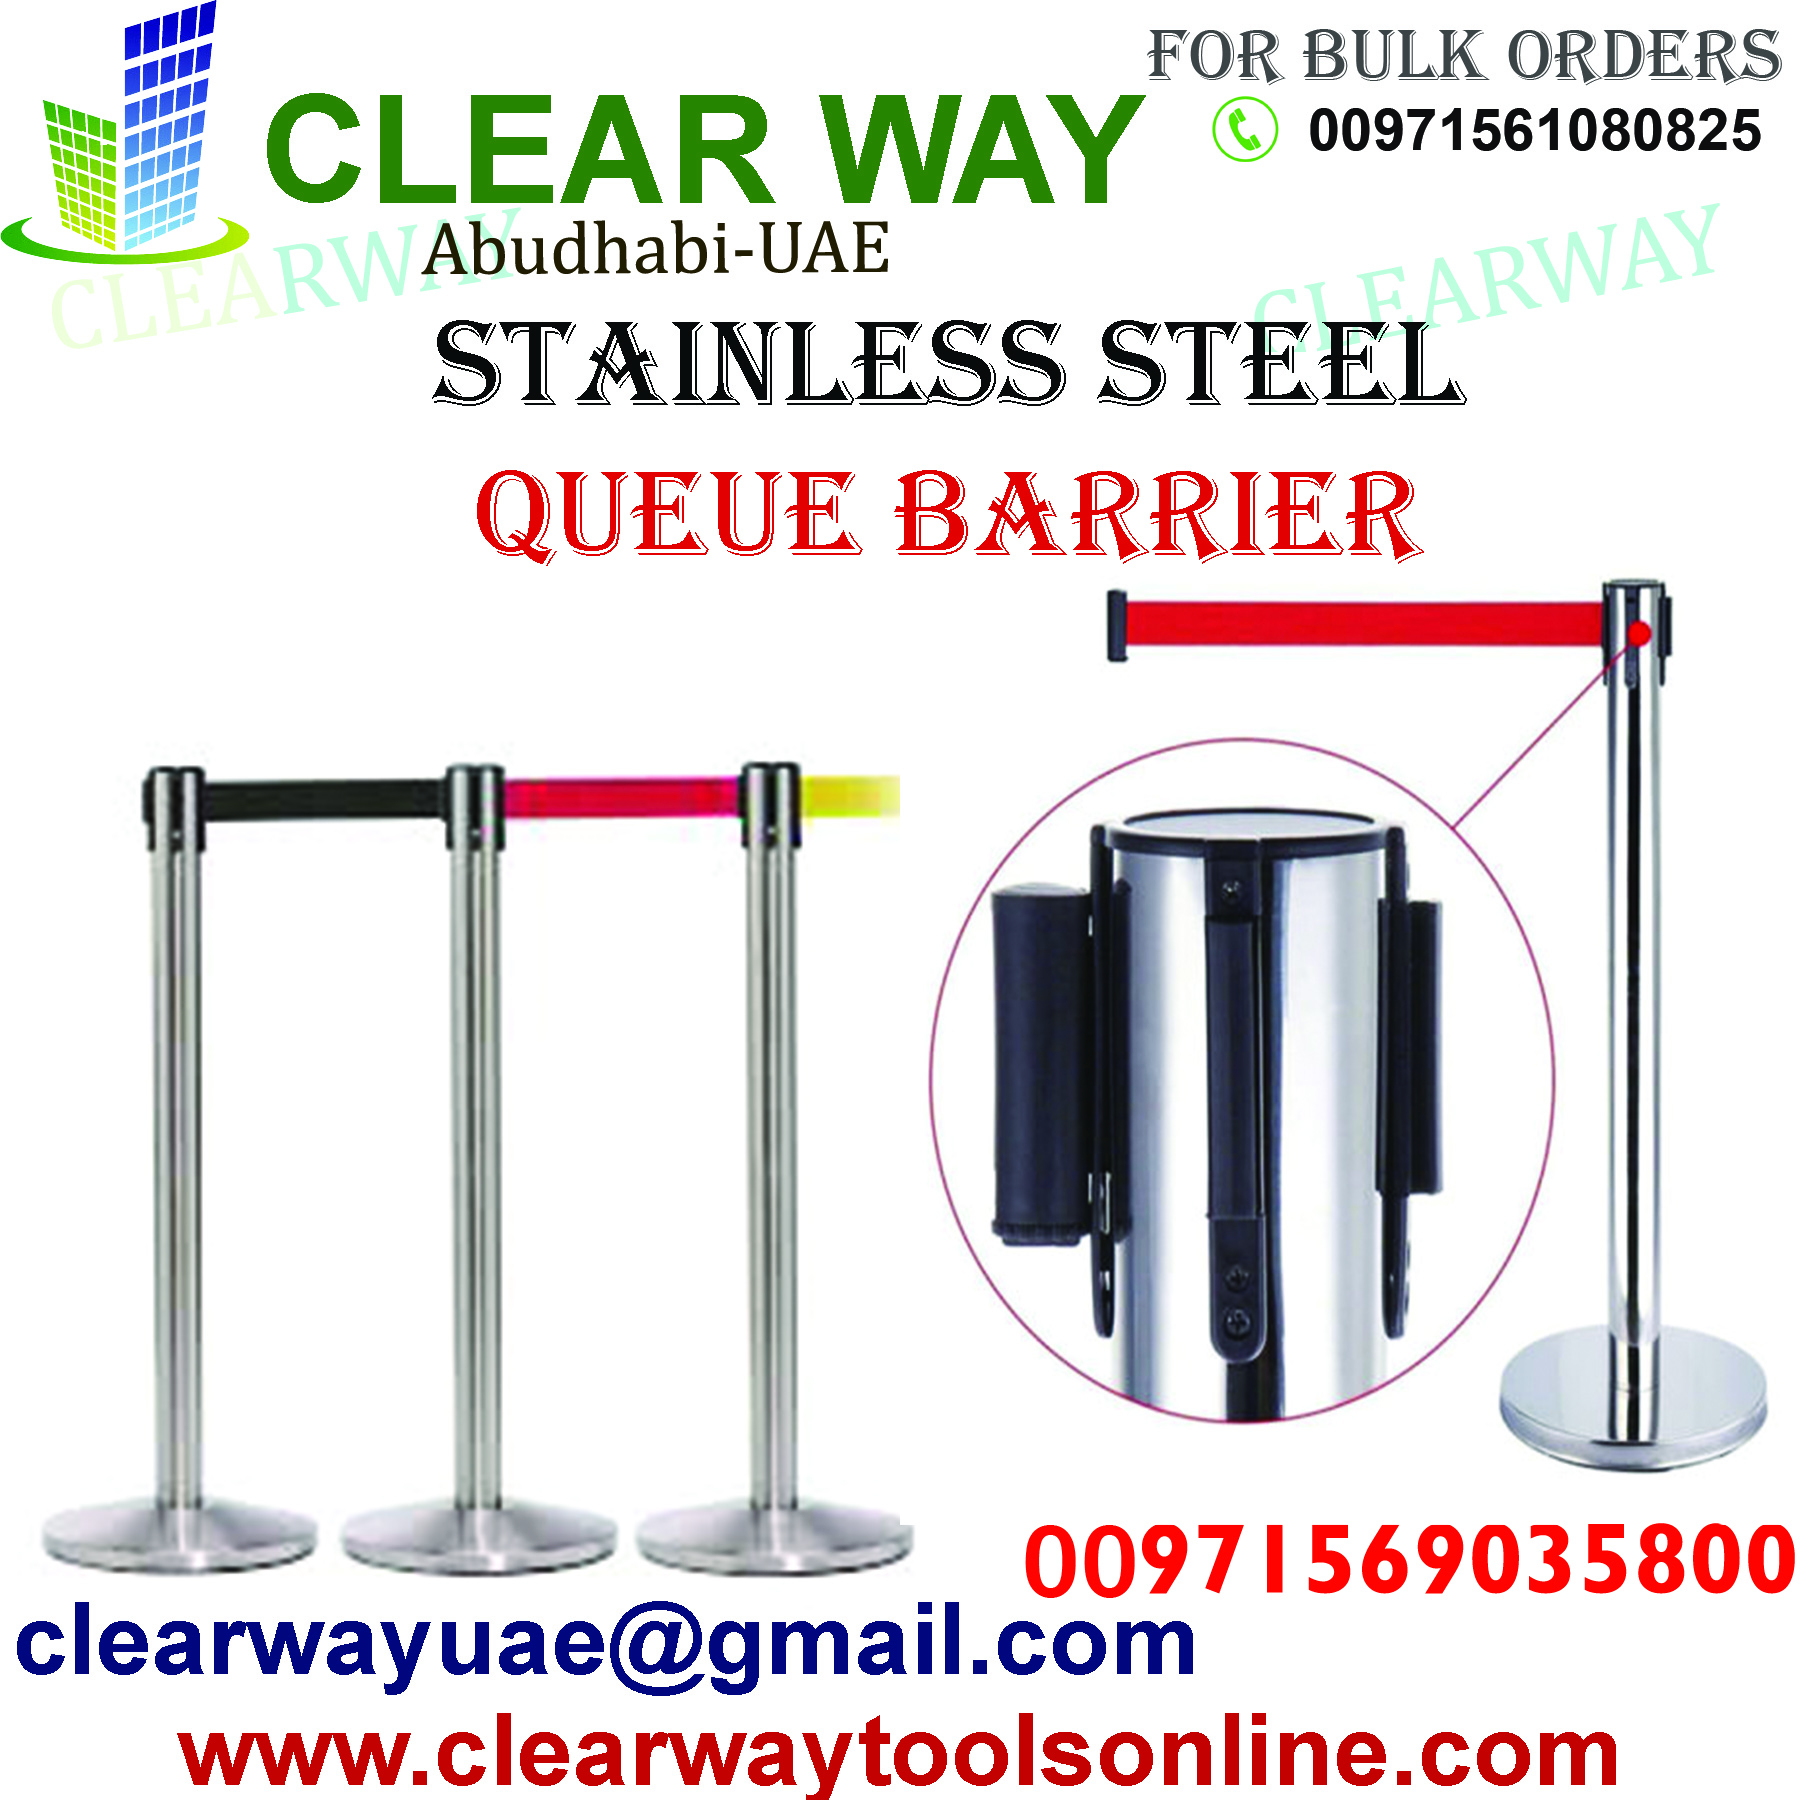 STAINLESS STEEL QUEUE BARRIER DEALER IN MUSSAFAH , ABUDHABI , UAE BY CLEARWAY